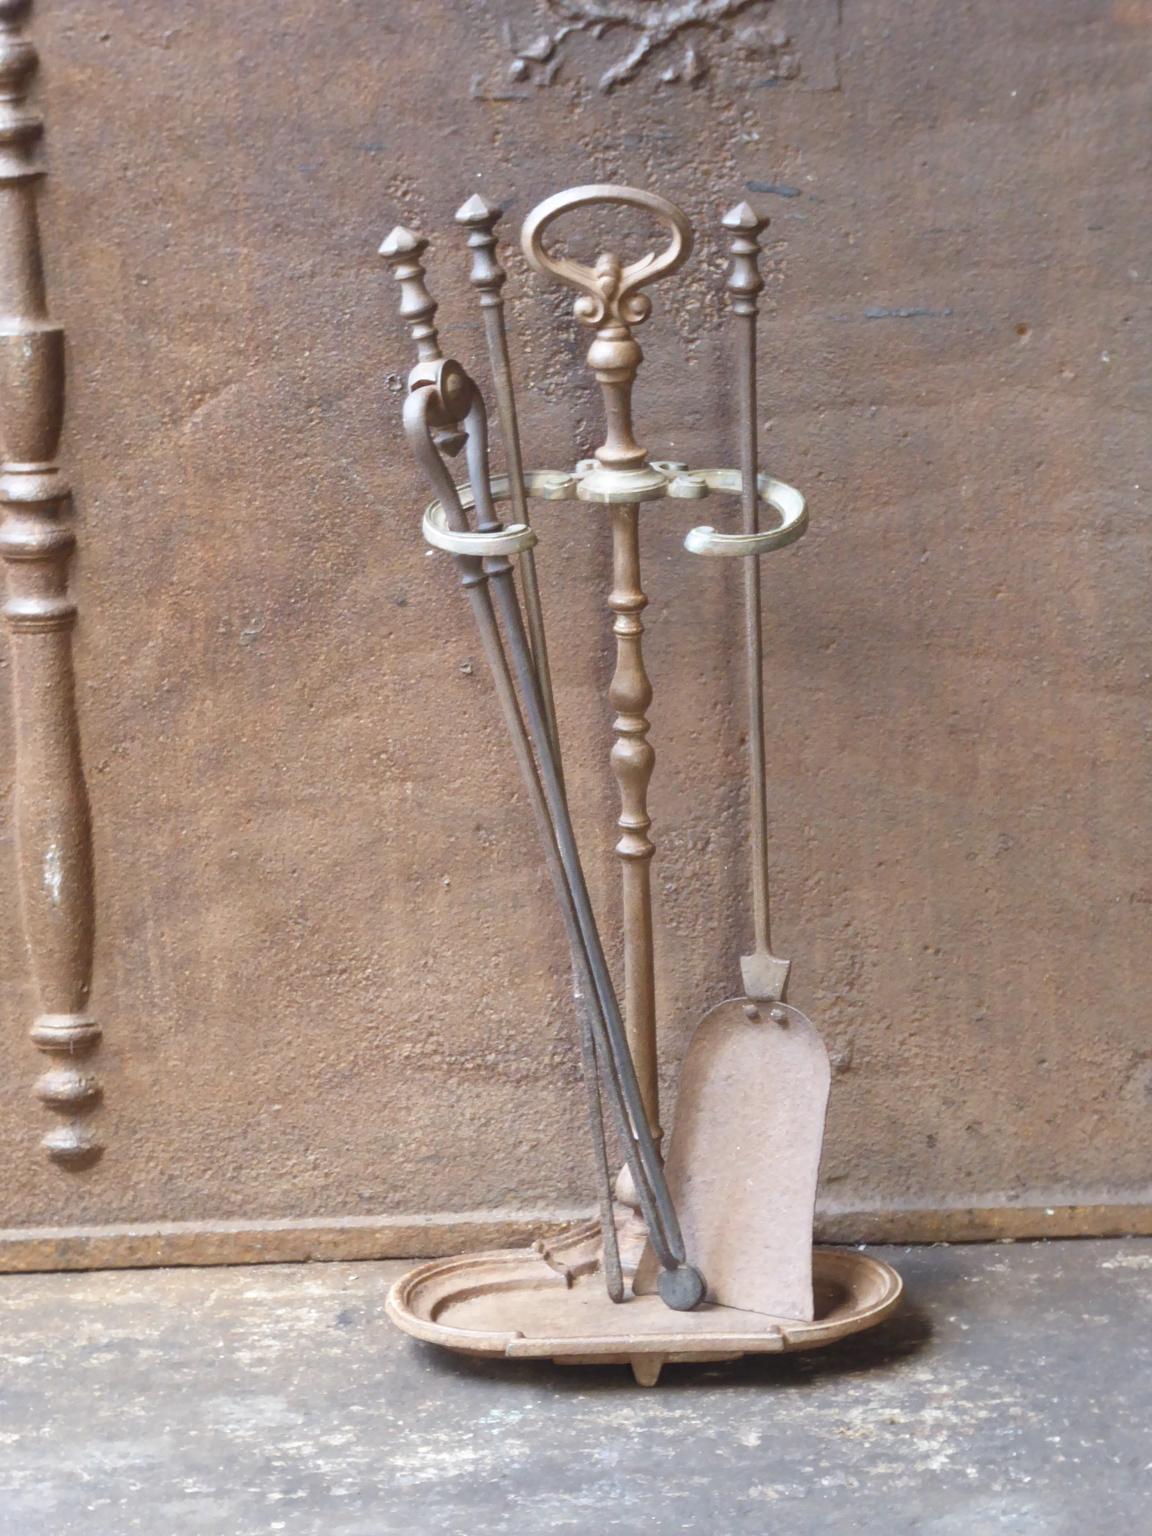 19th century English Victorian fireplace toolset made of cast iron, brass and wrought iron. The toolset consists of three tools and a stand. The condition is good.













 